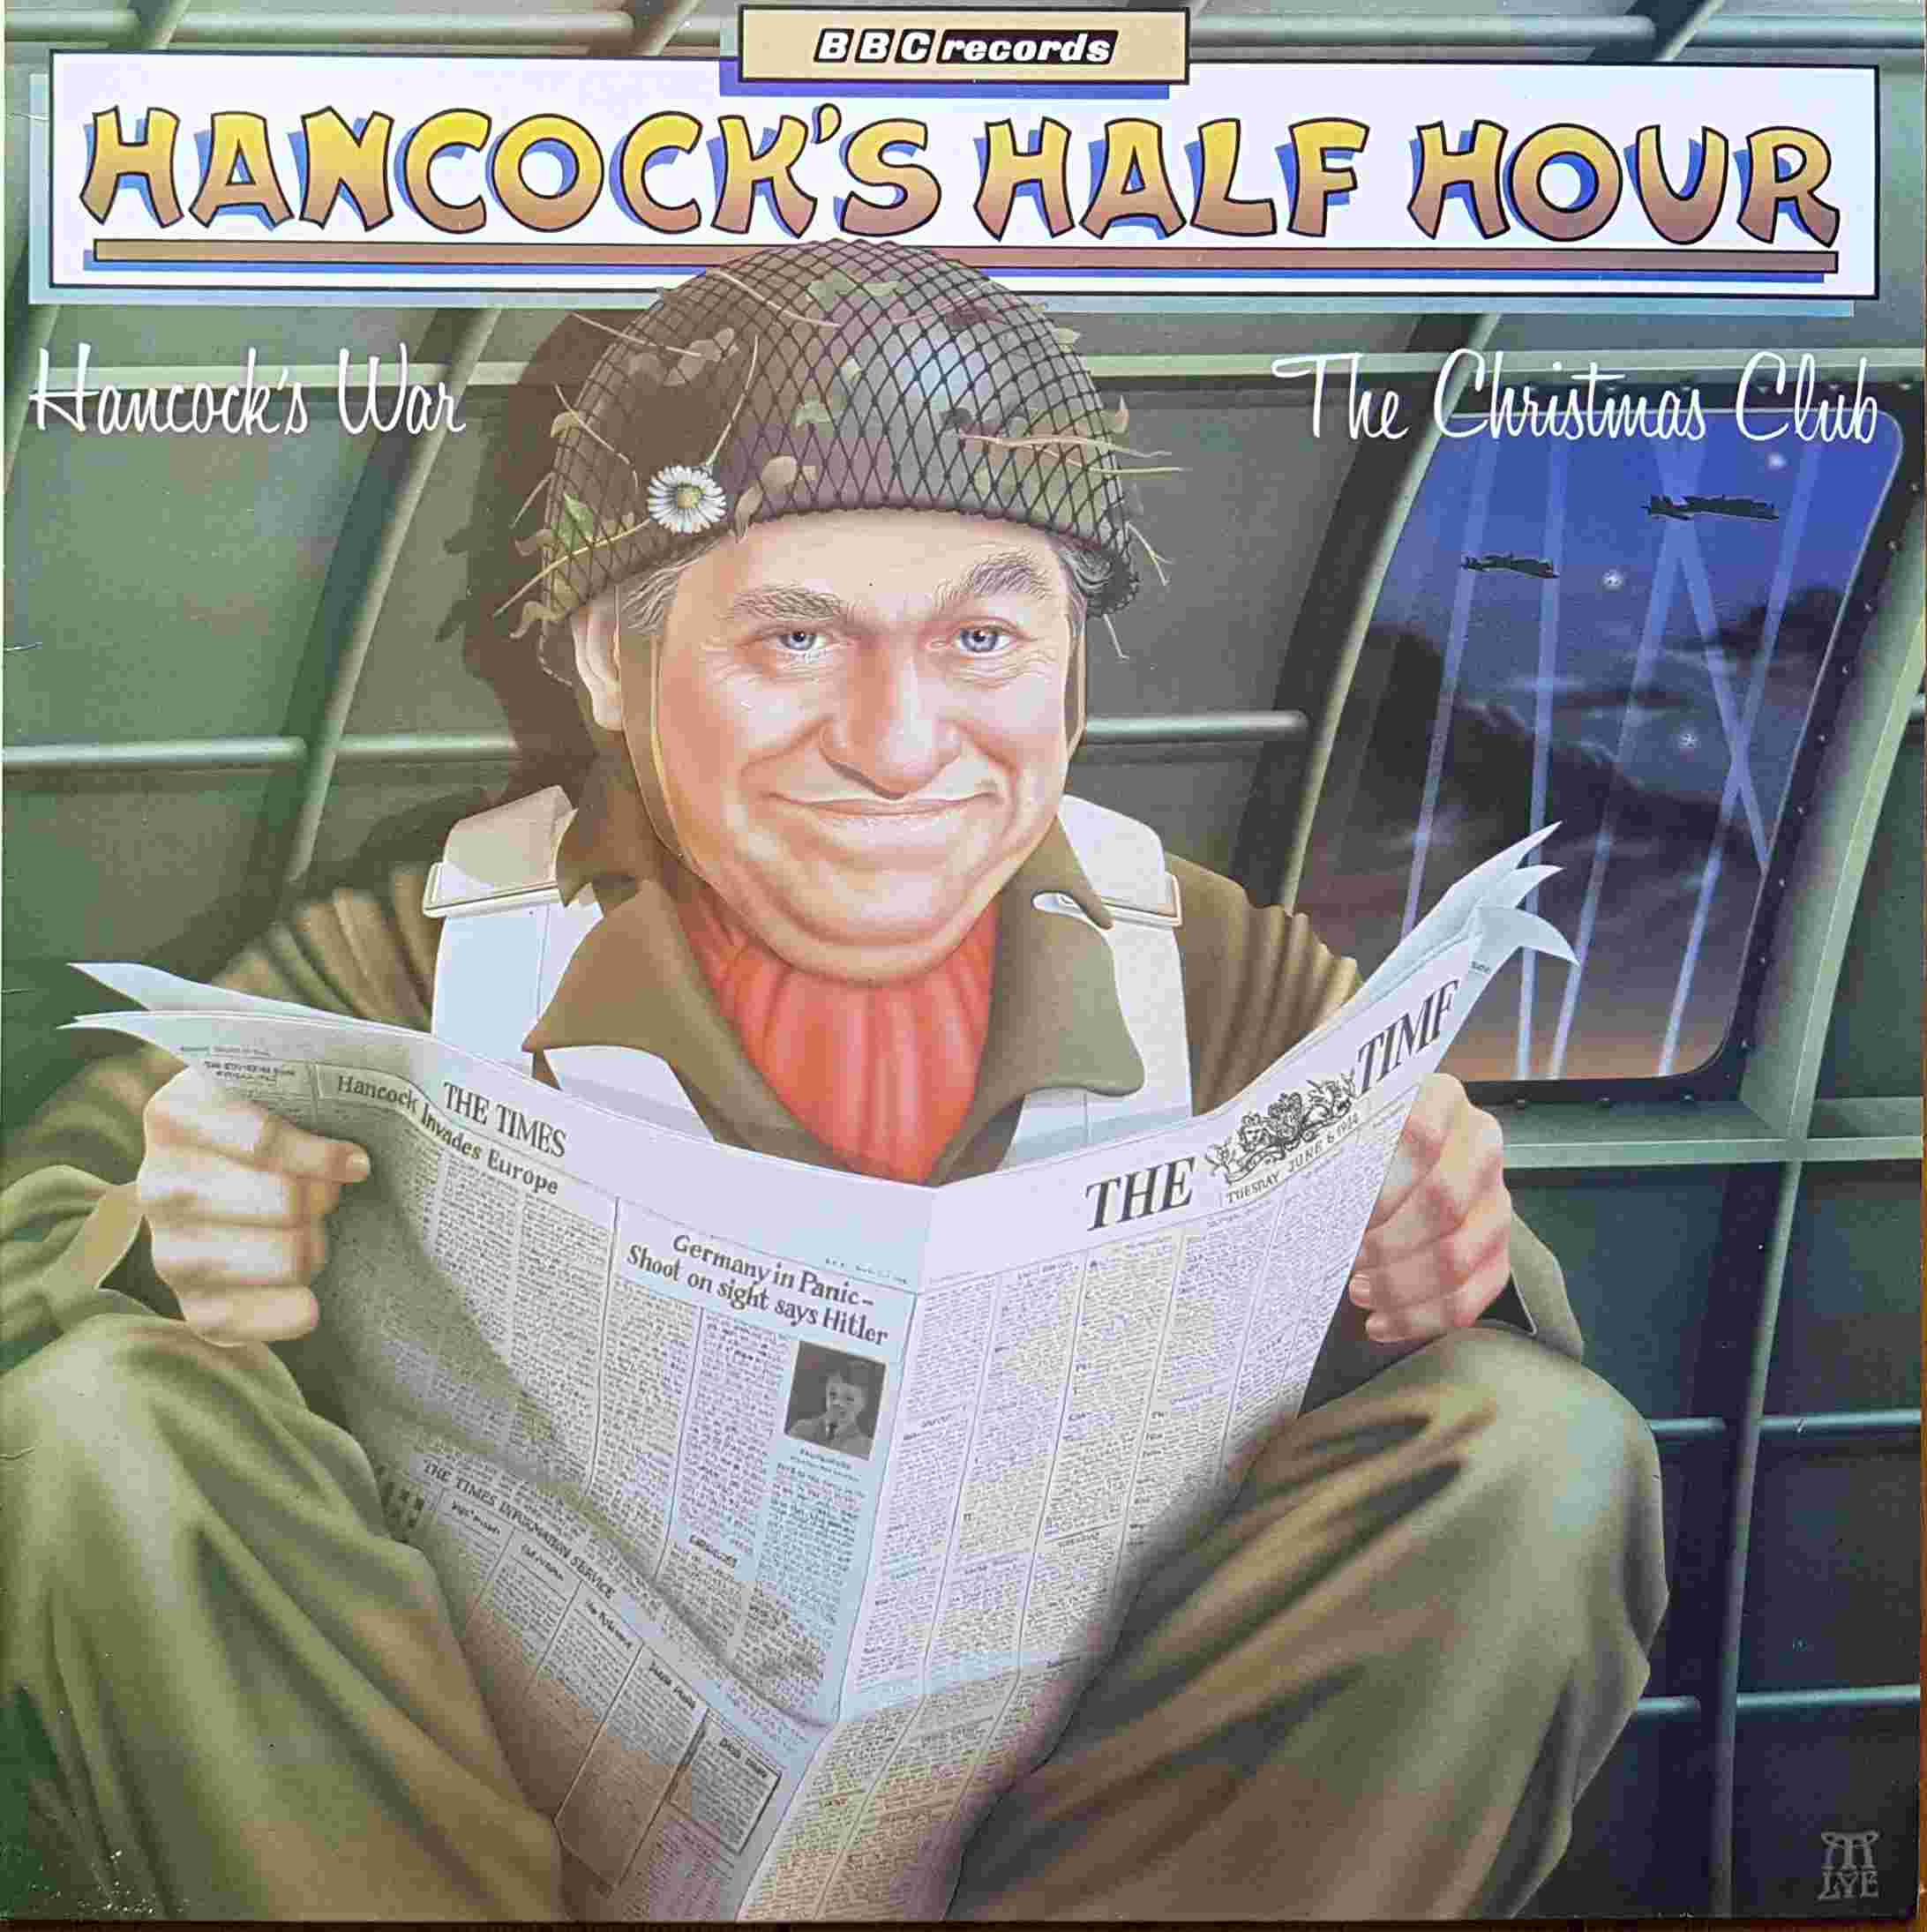 Picture of REB 526 Hancock's half hour - Volume 5 by artist Tony Hancock from the BBC albums - Records and Tapes library